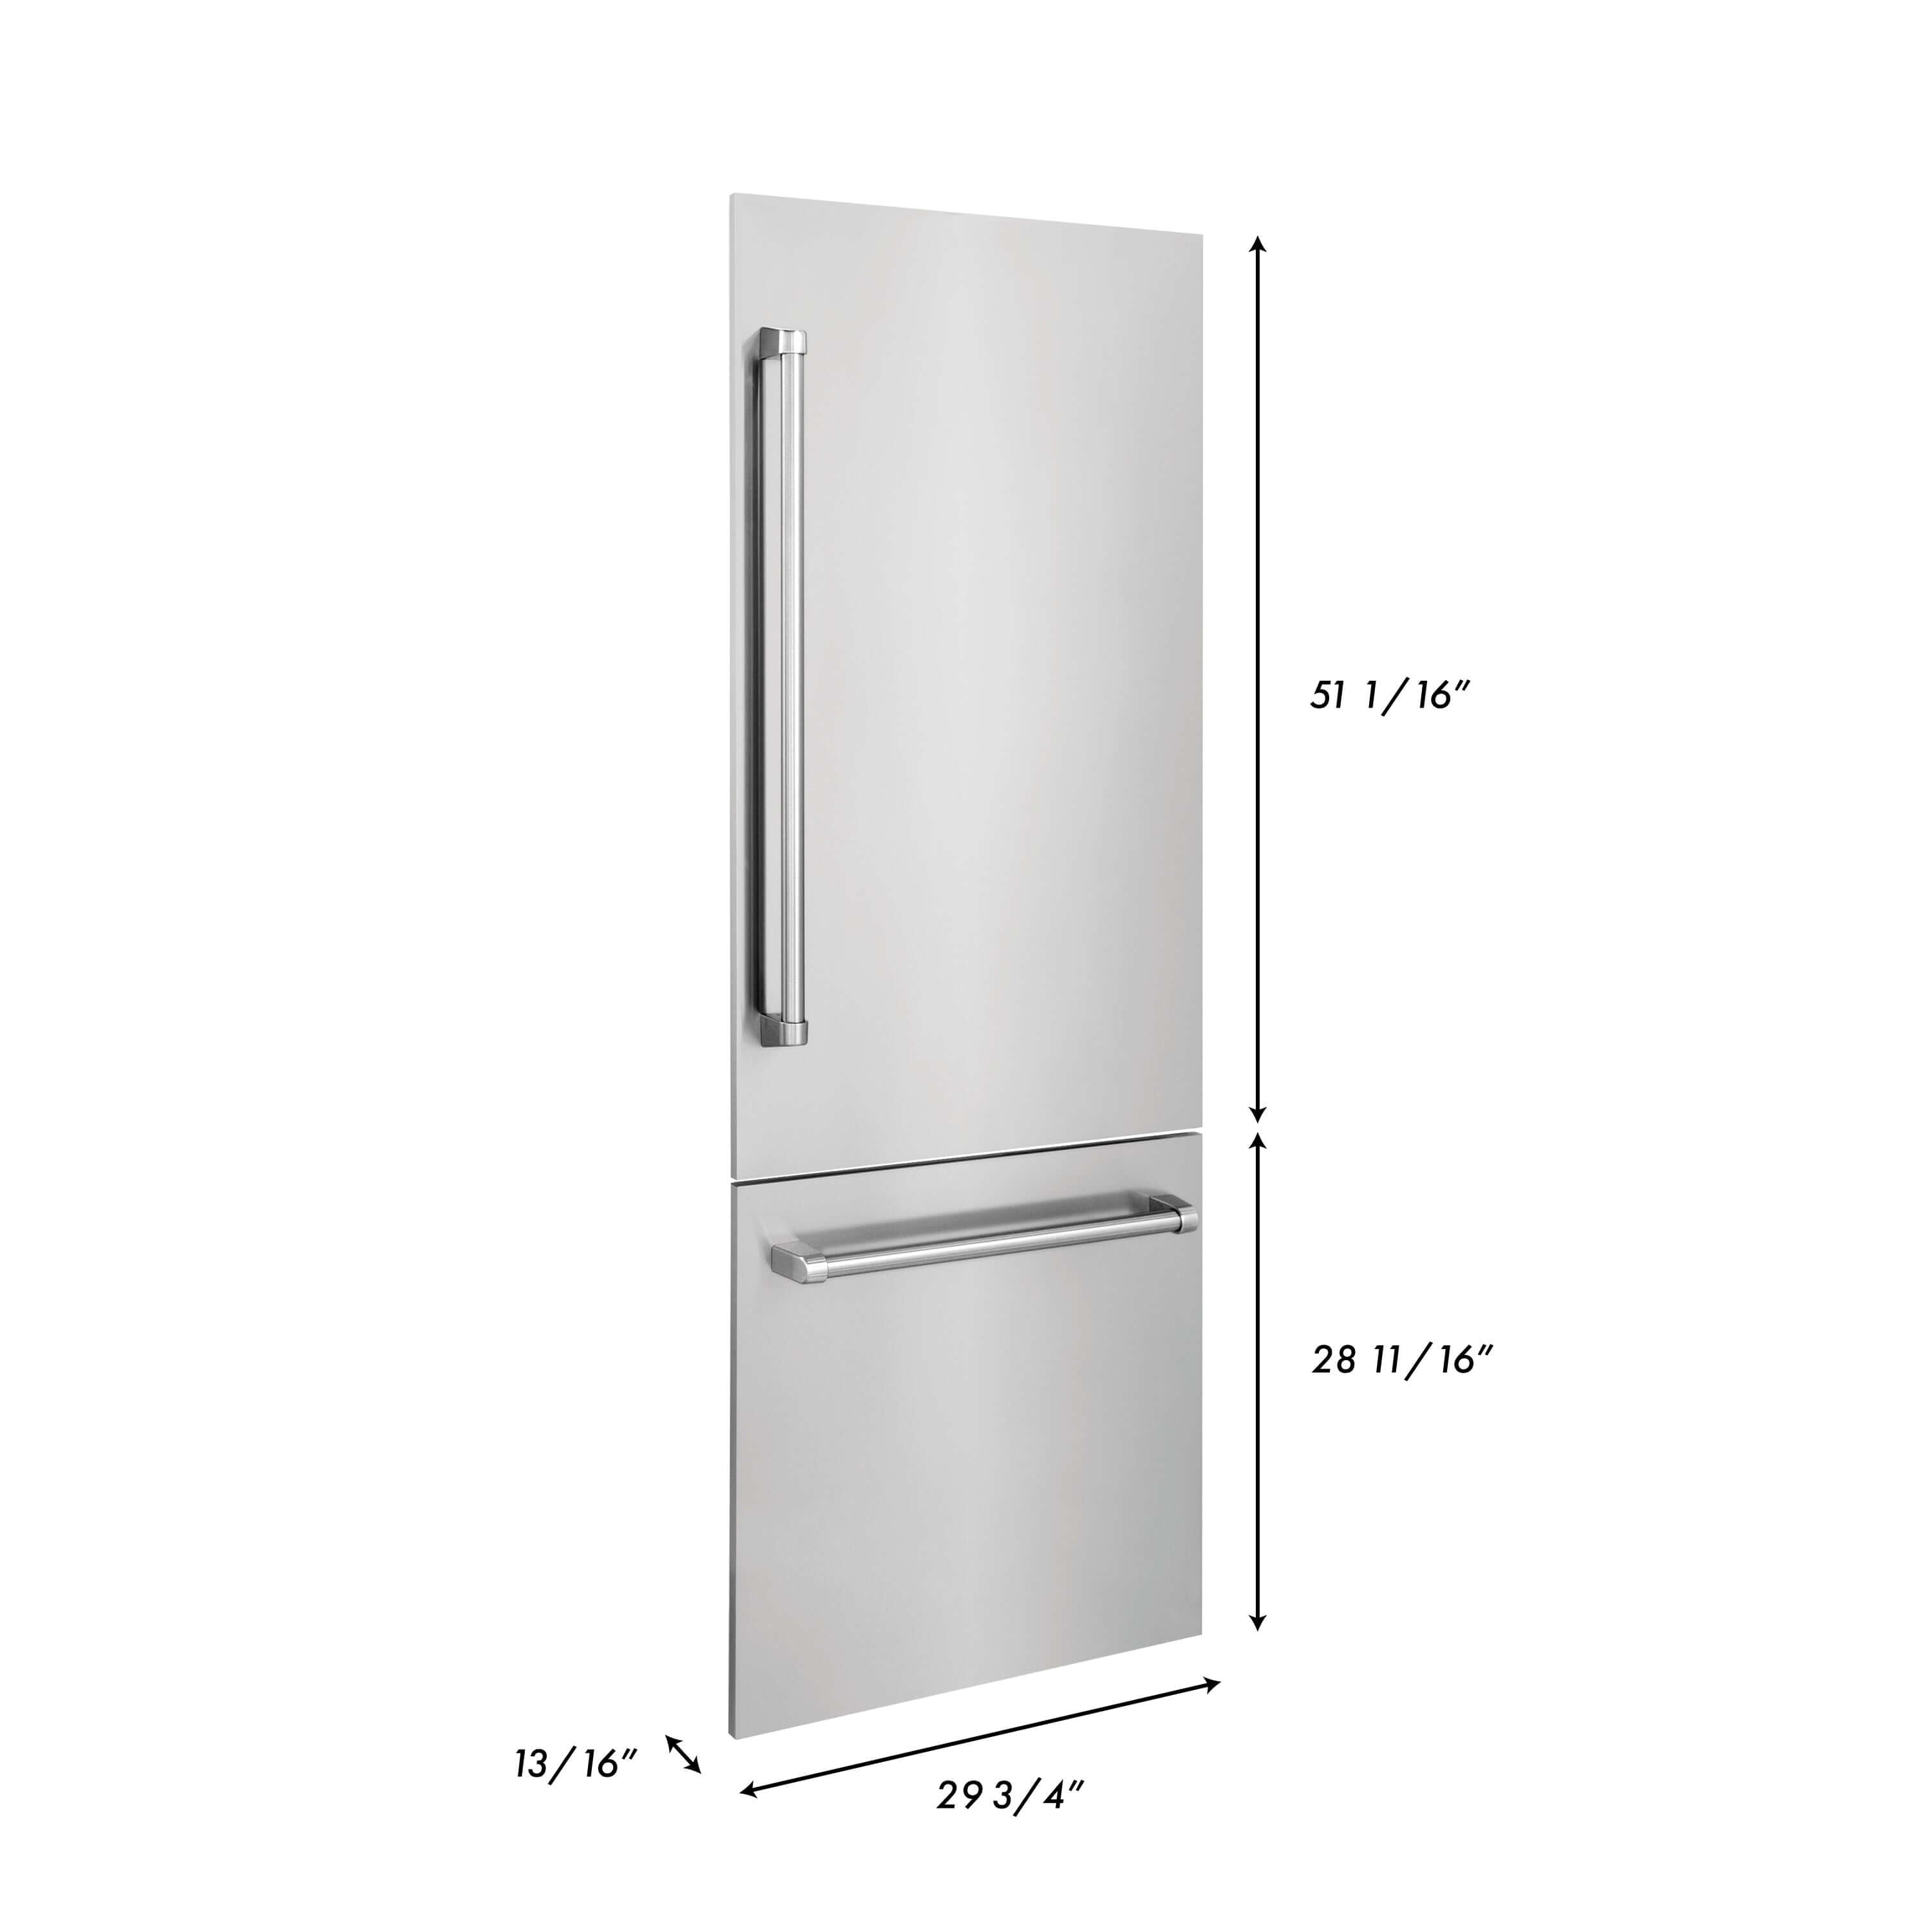 Panels & Handles Only- ZLINE 30 in. Refrigerator Panels in Stainless Steel for a 30 in. Built-in Refrigerator (RPBIV-304-30) dimensional diagram with measurements.